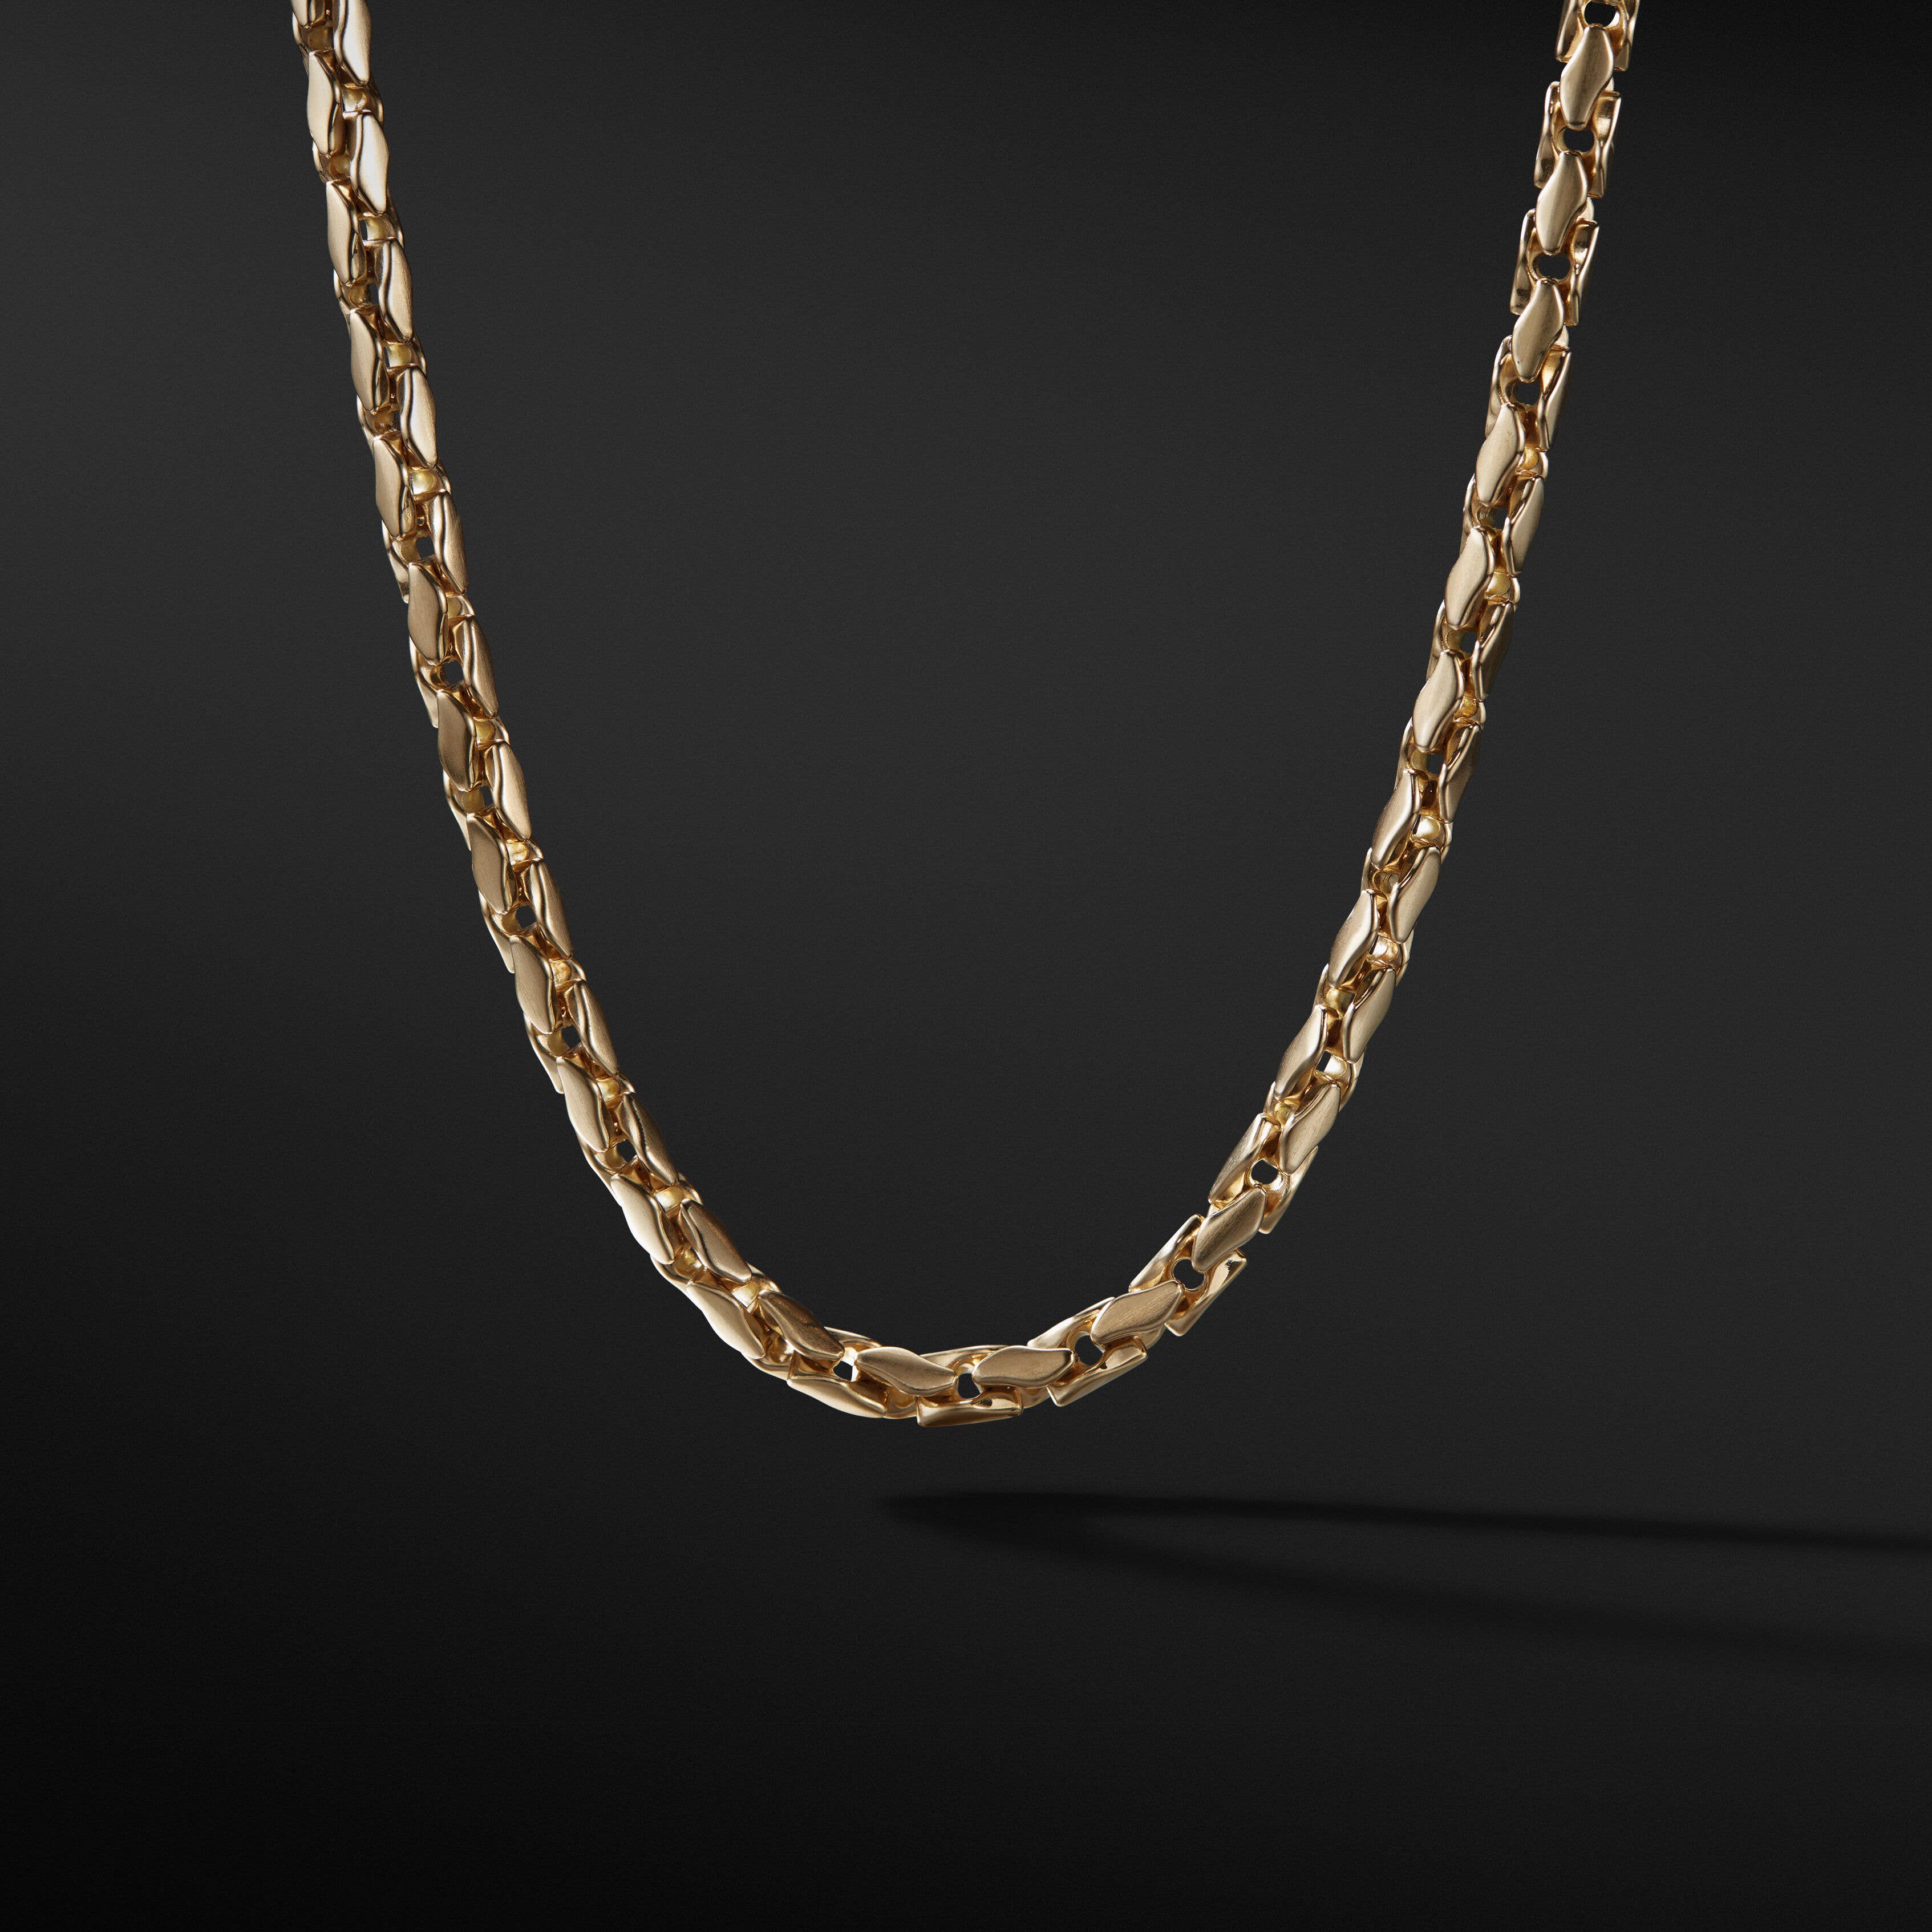 Fluted Chain Necklace in 18K Yellow Gold, 5mm